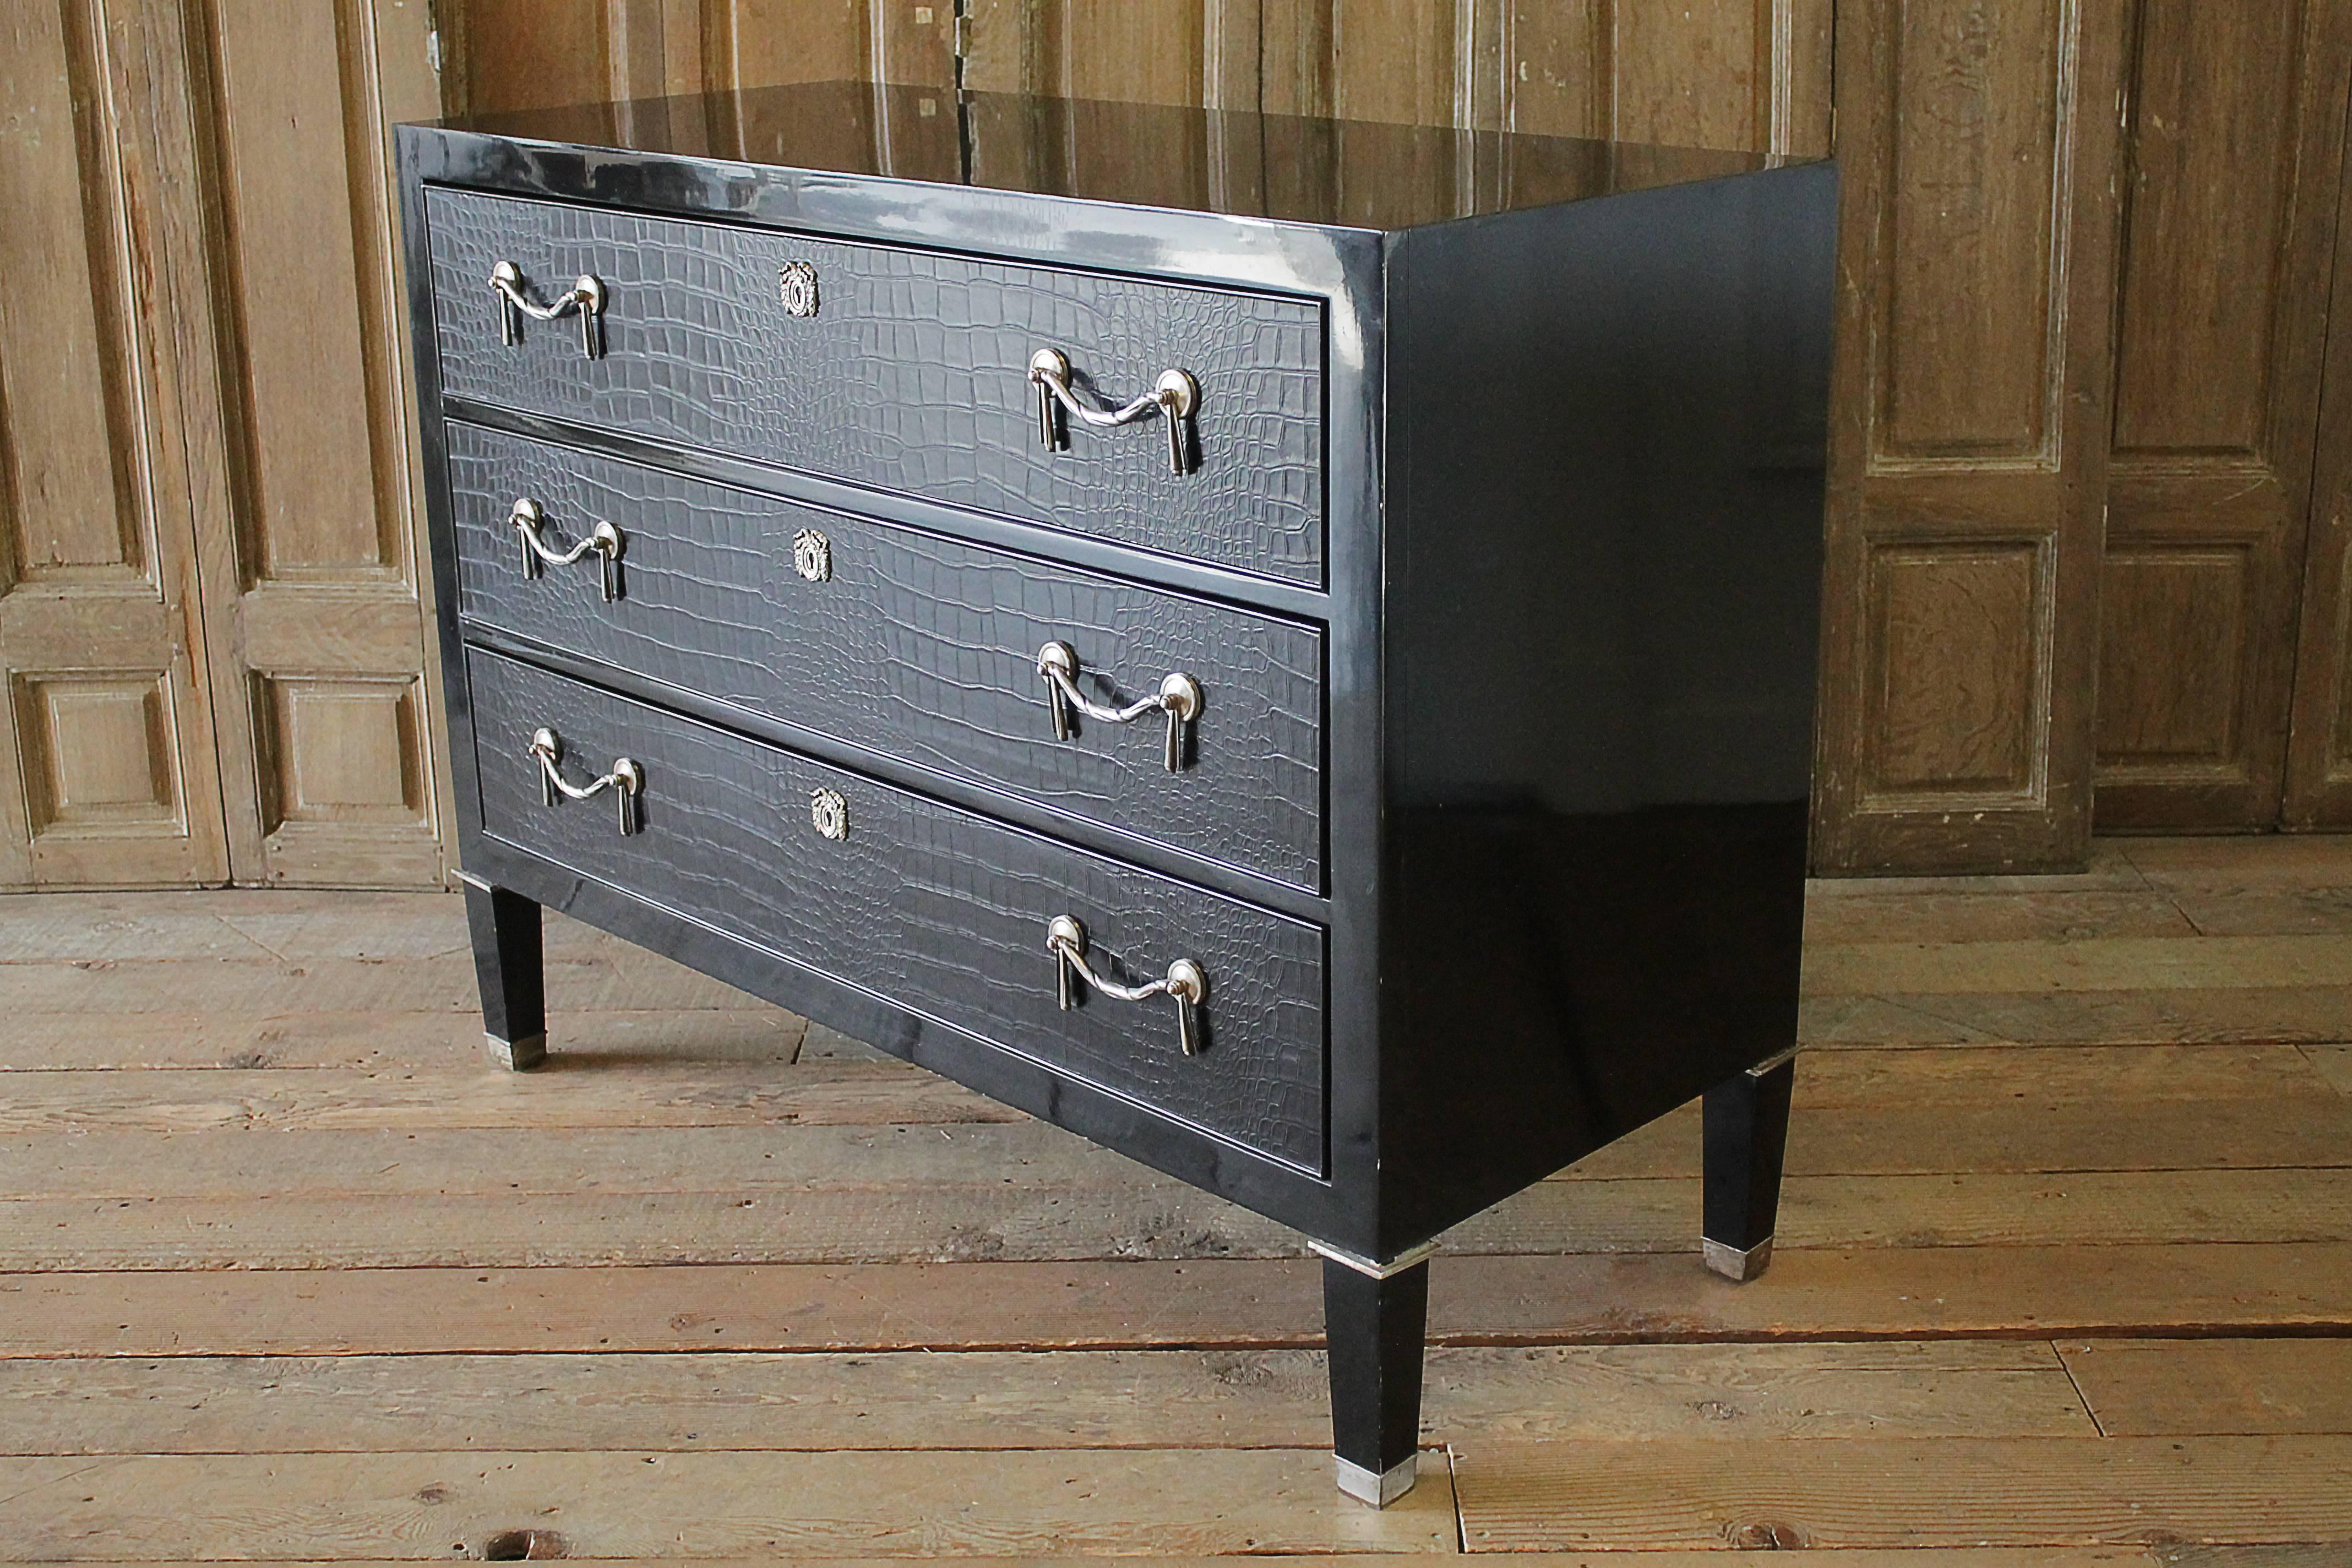 Brook street chest, black
RL number: 7620-48 piano black with antique silver hardware
MSRP: $11,995
This modern interpretation of an Empire Revival dresser has faux crocodile drawer fronts with antiqued silver garland pulls and